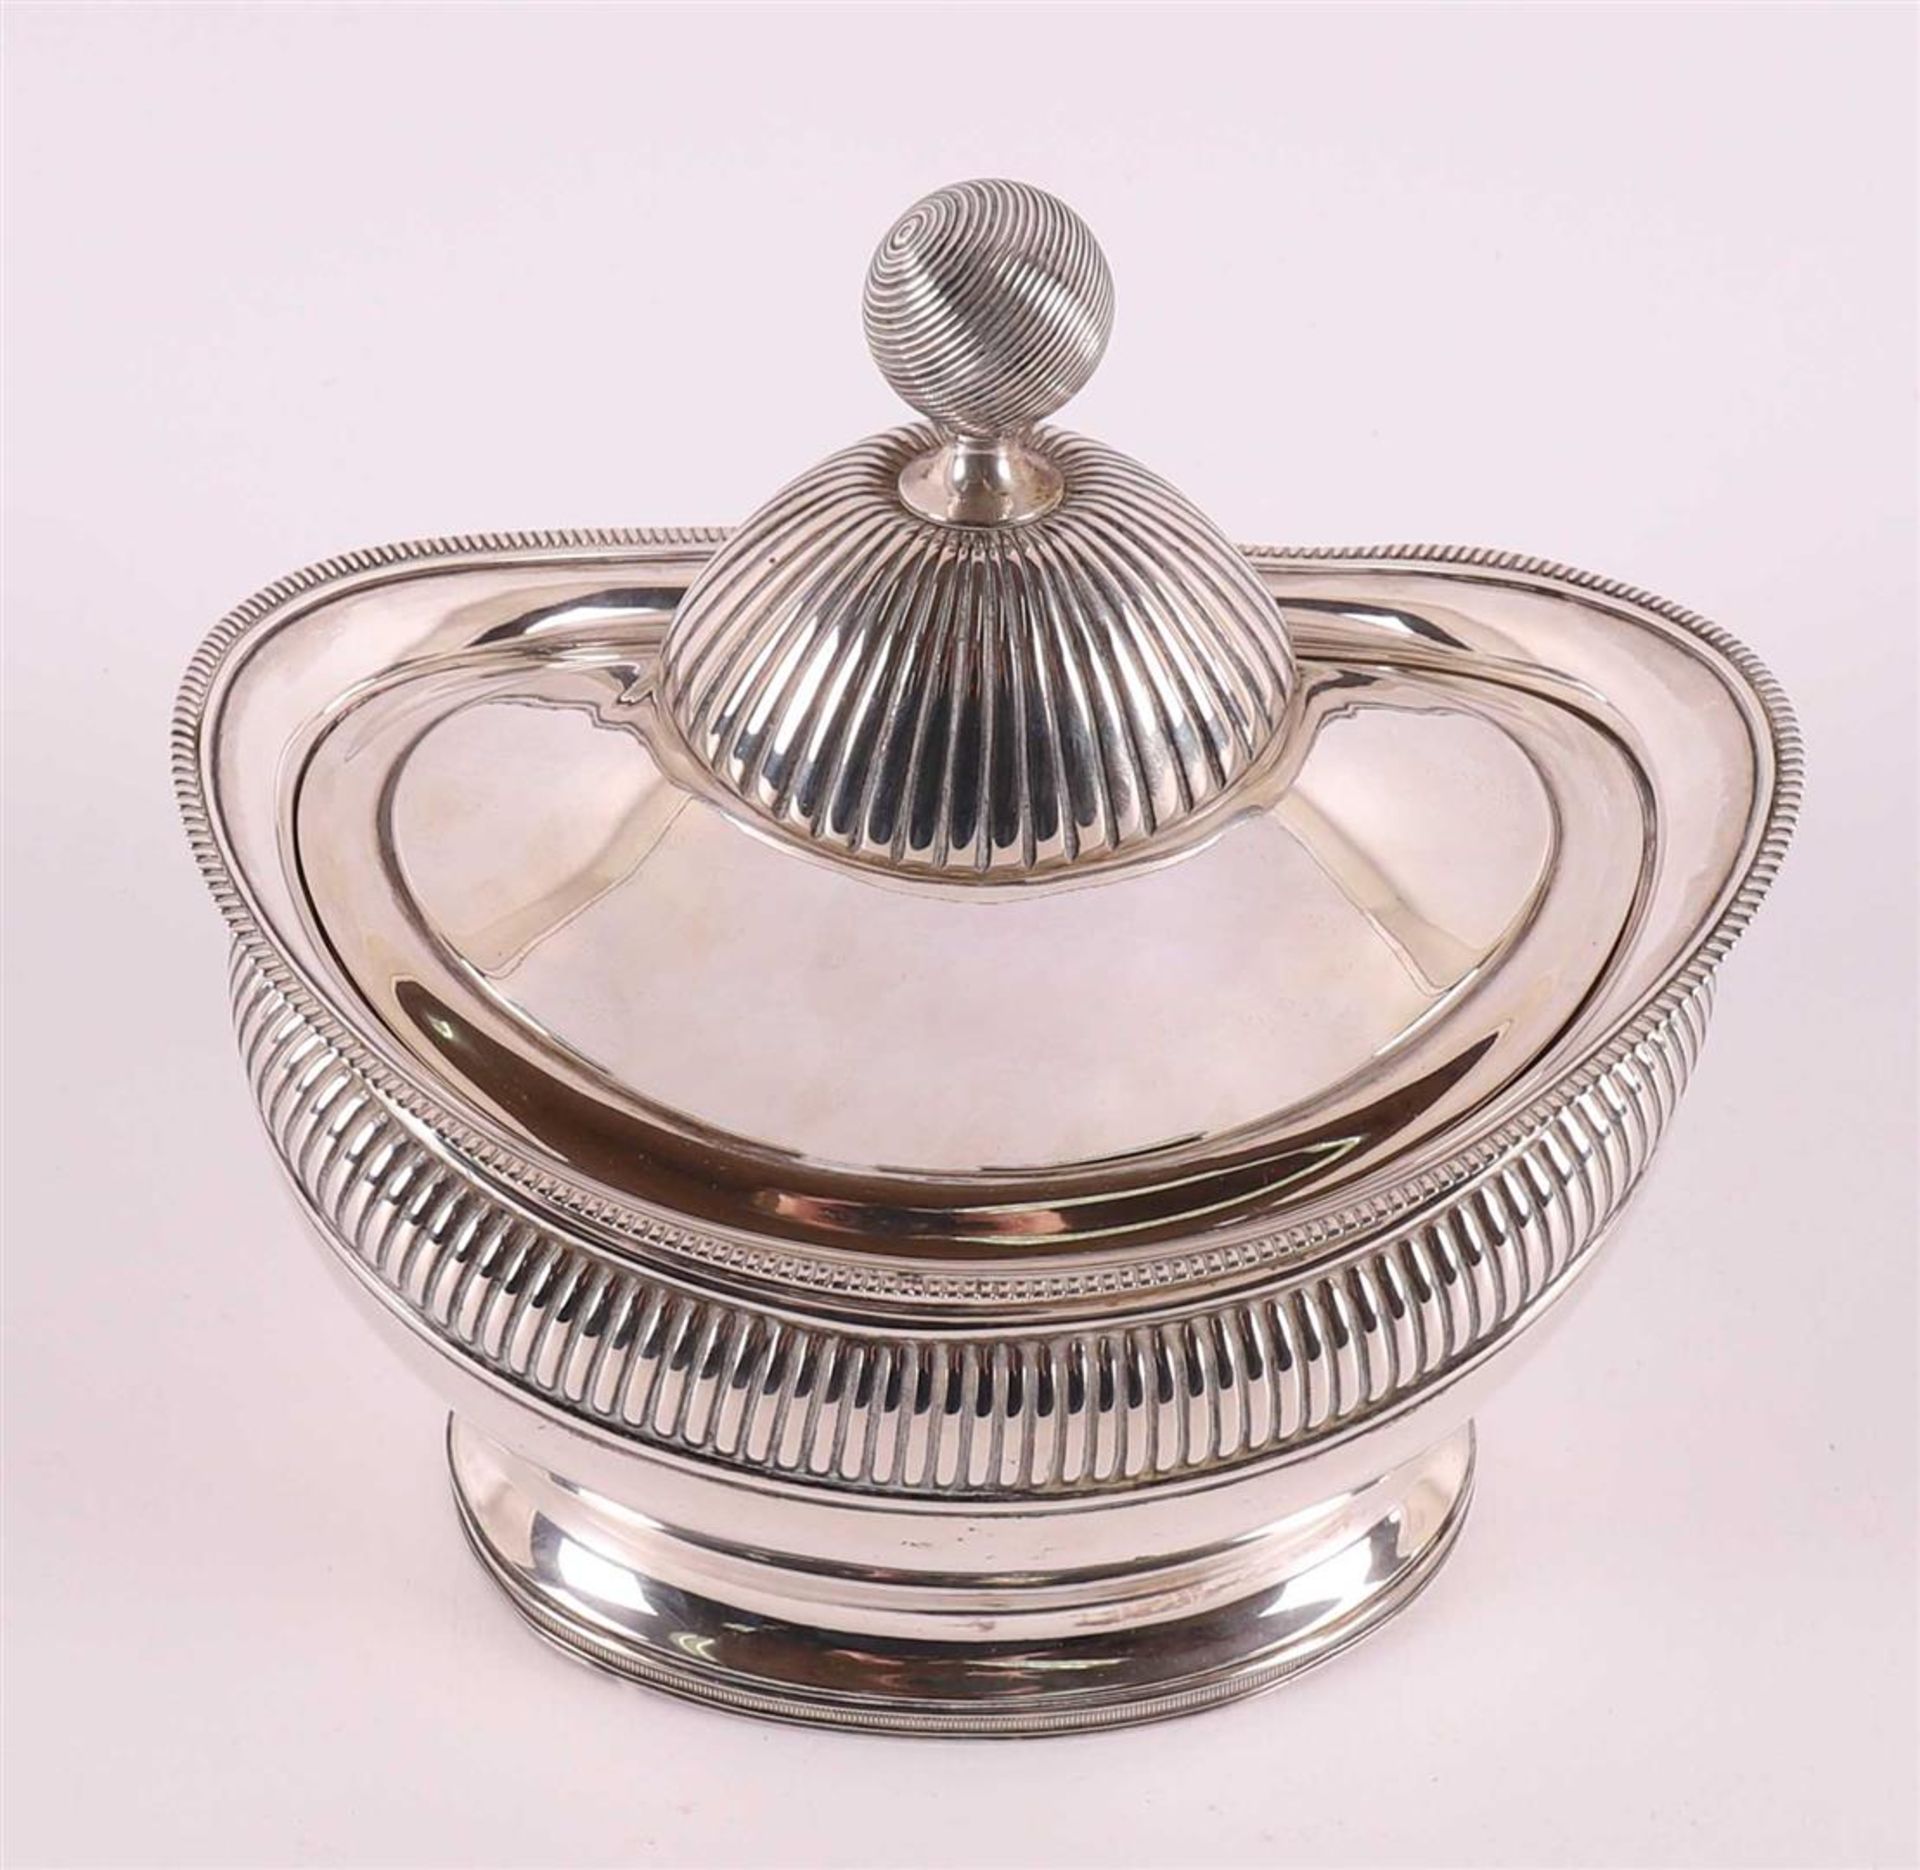 A 1st grade 925/1000 silver Empire boat-shaped tobacco lidded jar, - Image 2 of 9